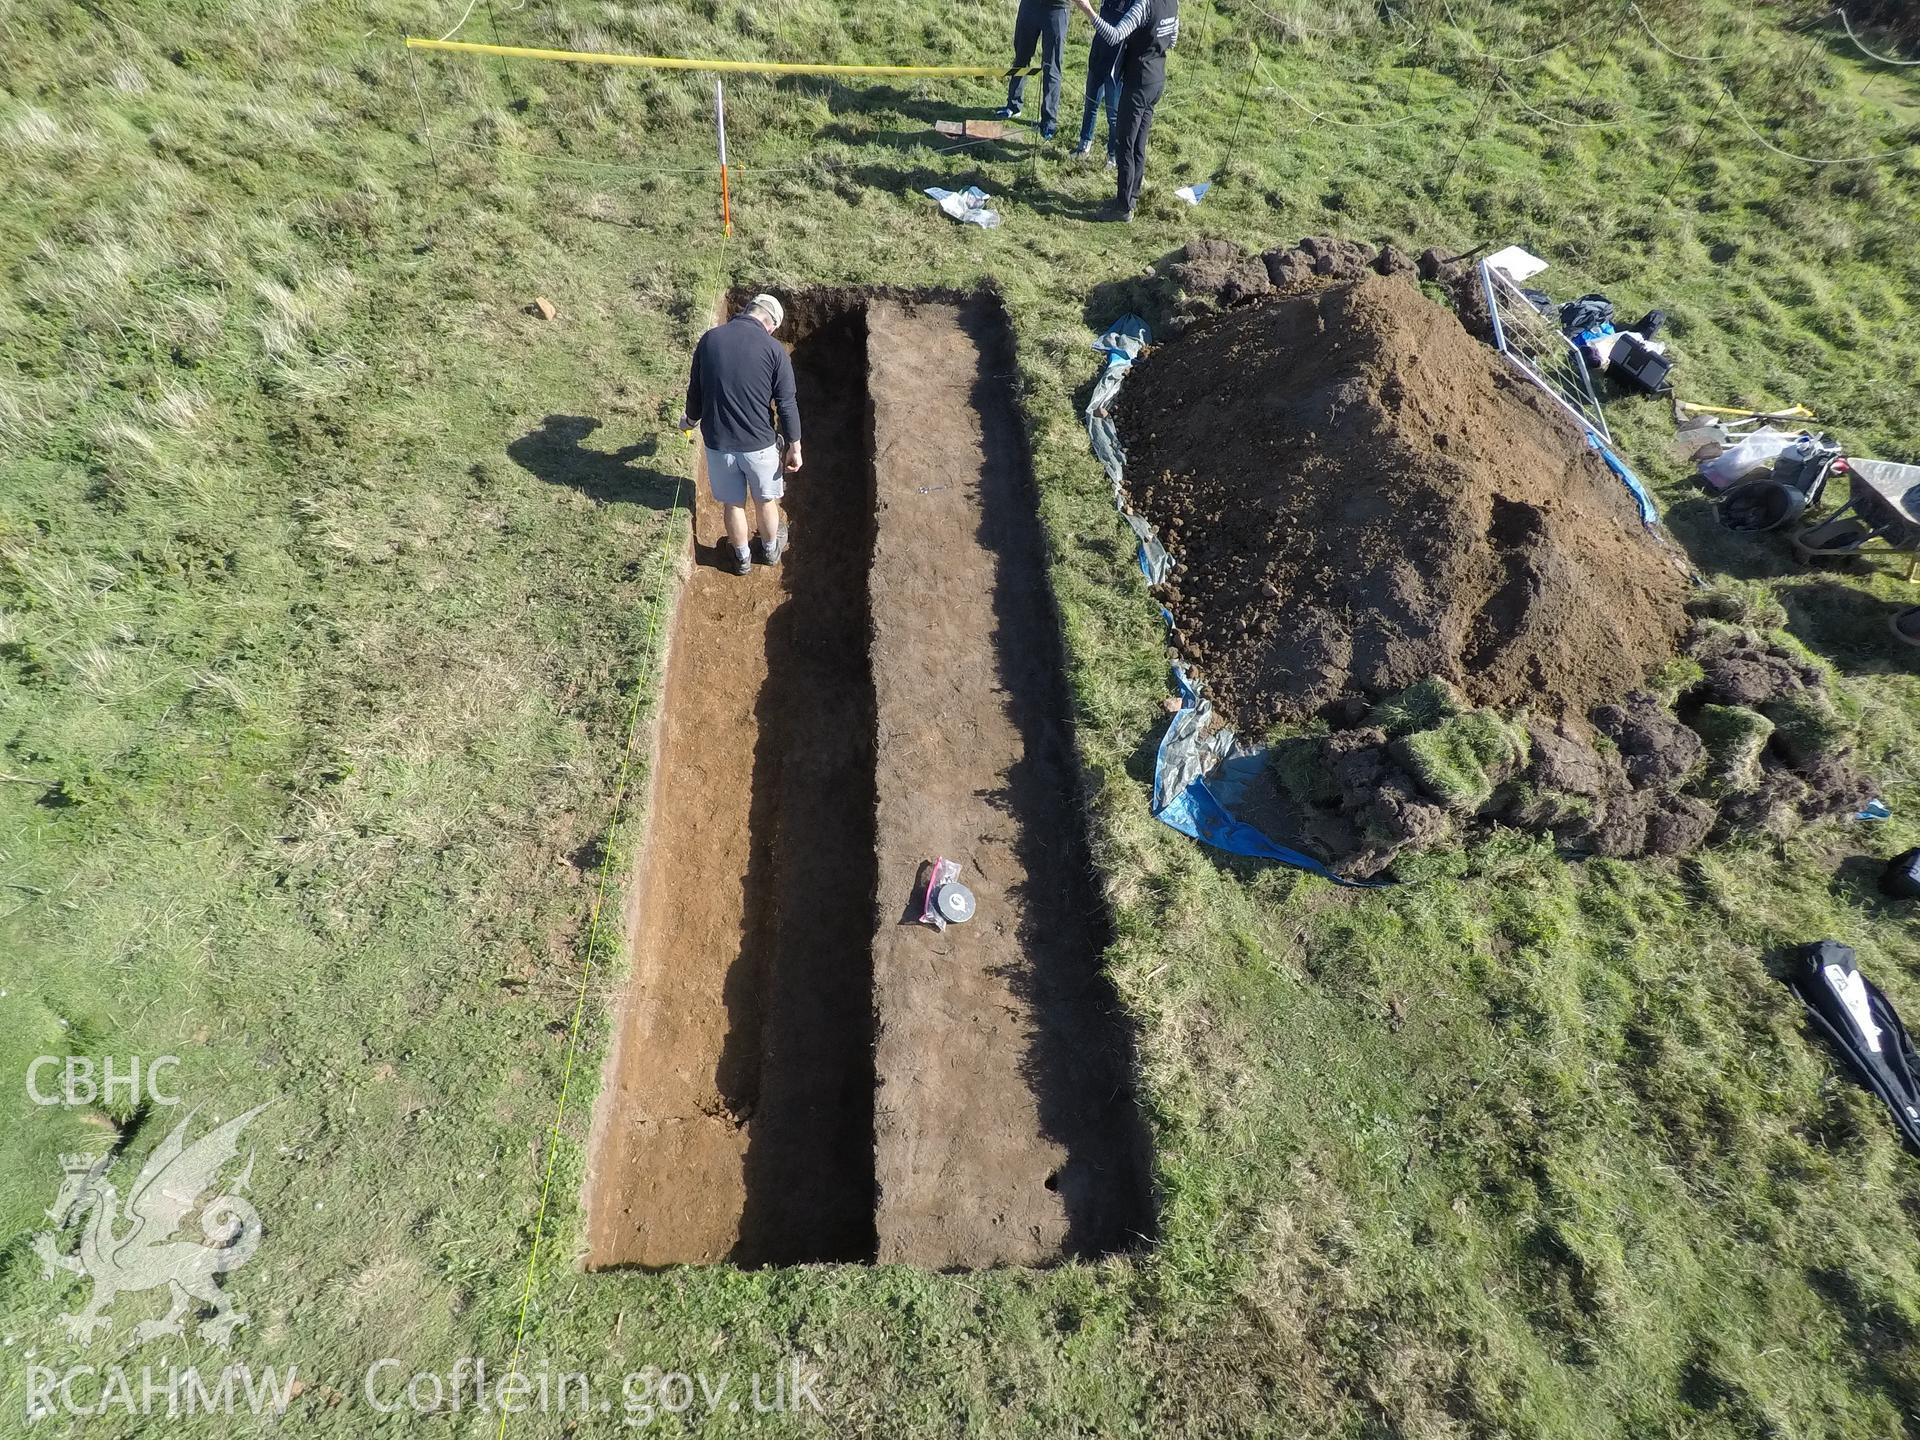 Investigator's photography showing the evaluation excavation of a geophysical anomaly in Well Meadow, Skomer Island, between 25-27th Sept 2018 as part of the Skomer Island Project. High view of trench from west.